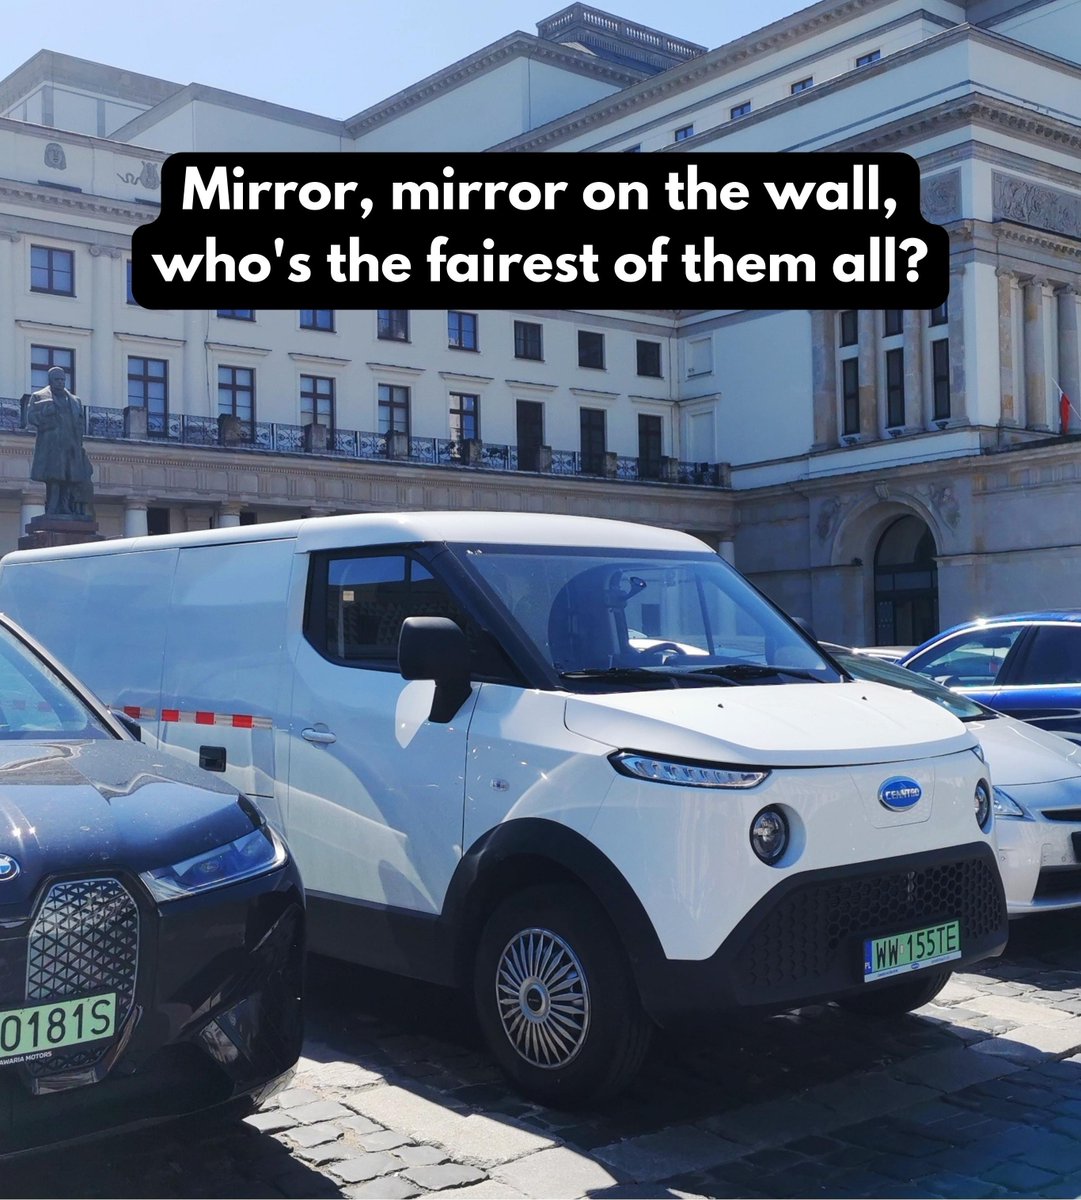 Mirror, mirror on the wall, who's the fairest of them all? 🥳🚚🥳 #cenntro #cenn #logistar #cenntroev #cenntroelectric #ls260#electricvehicle #electriccar #ZeroEmissions #easydrive